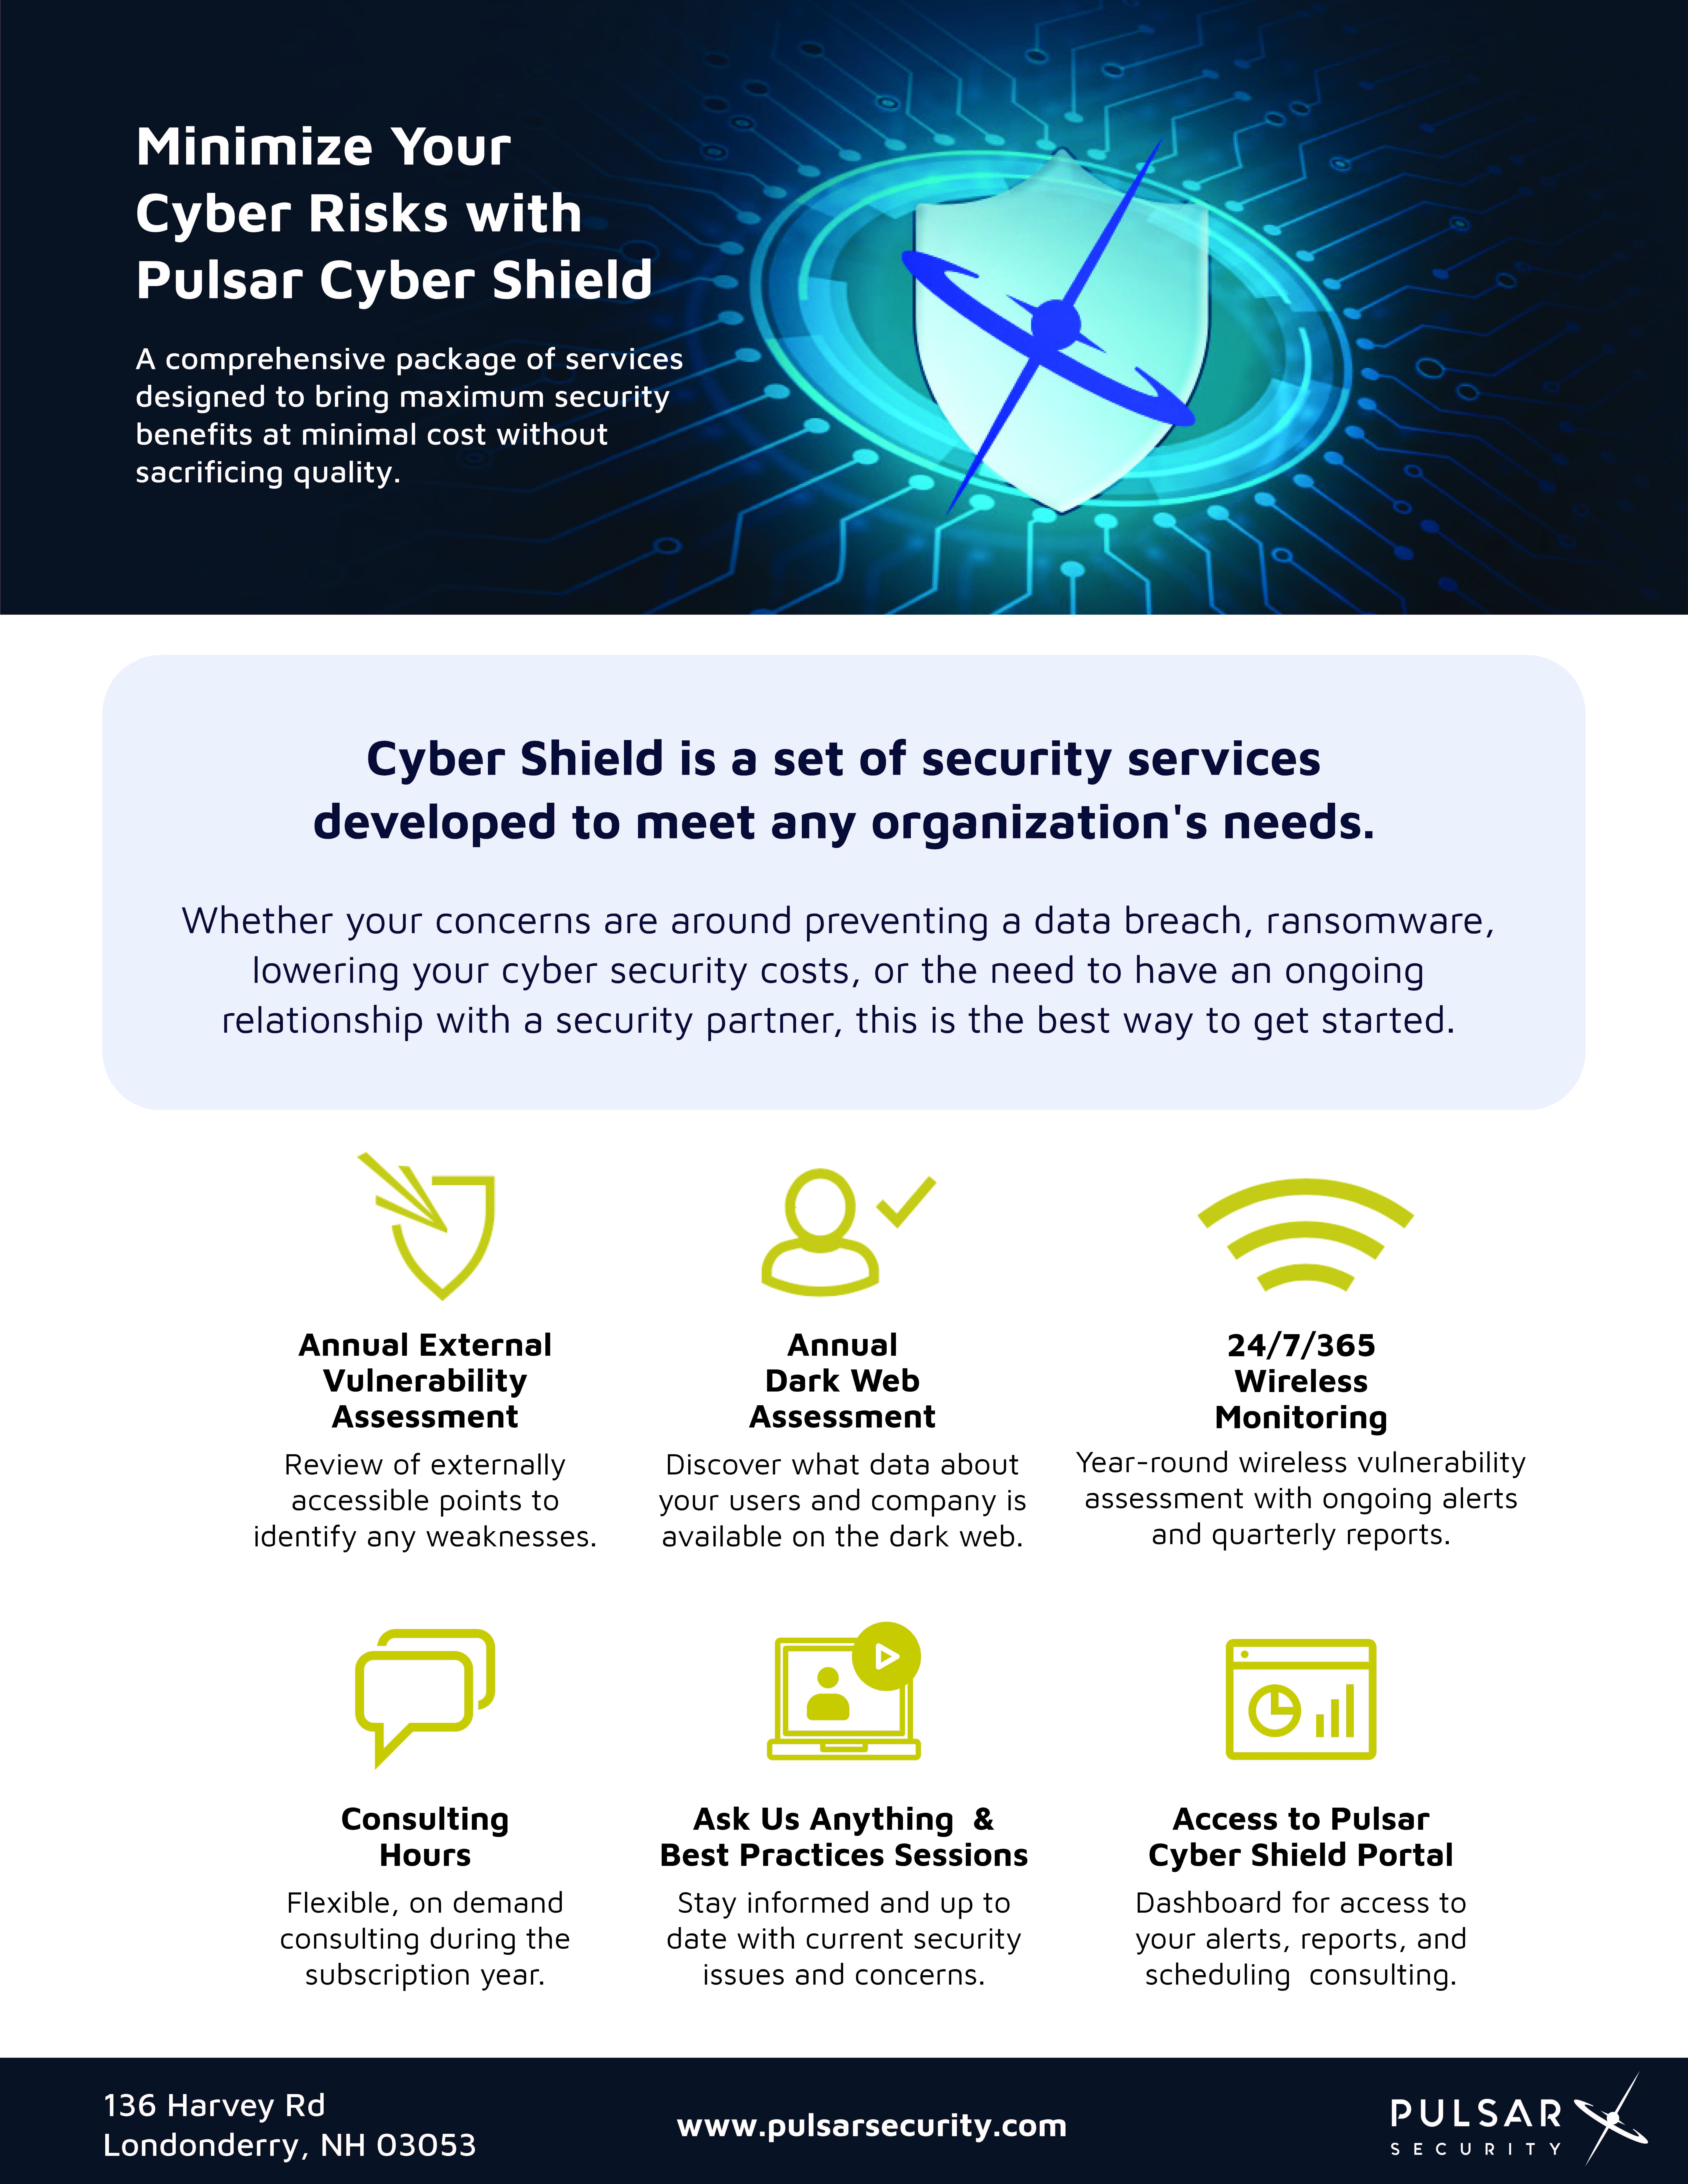 What is CyberShield